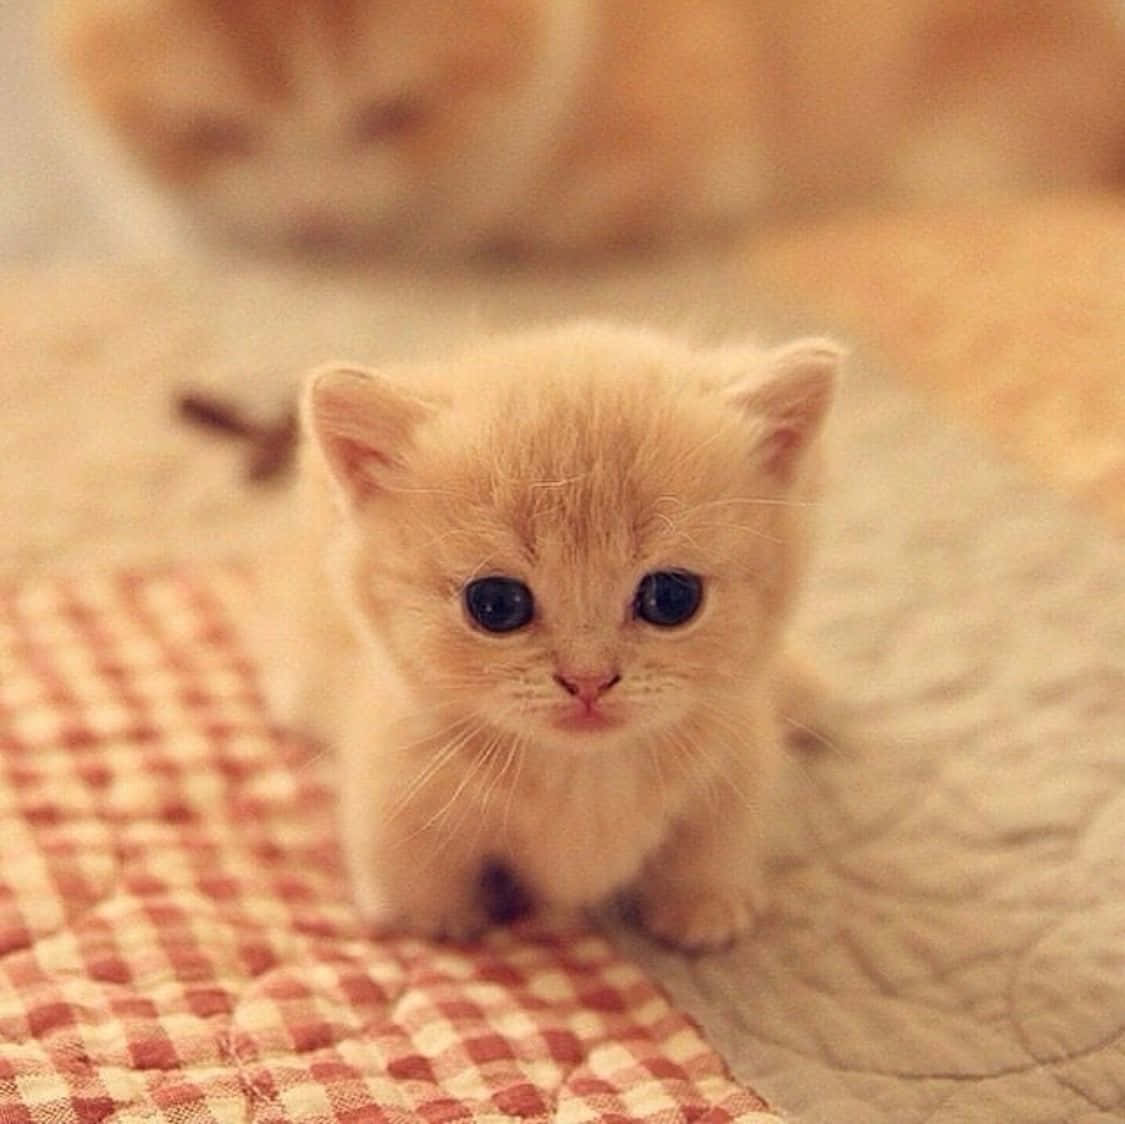 100+] Baby Cat Pictures | Wallpapers.Com